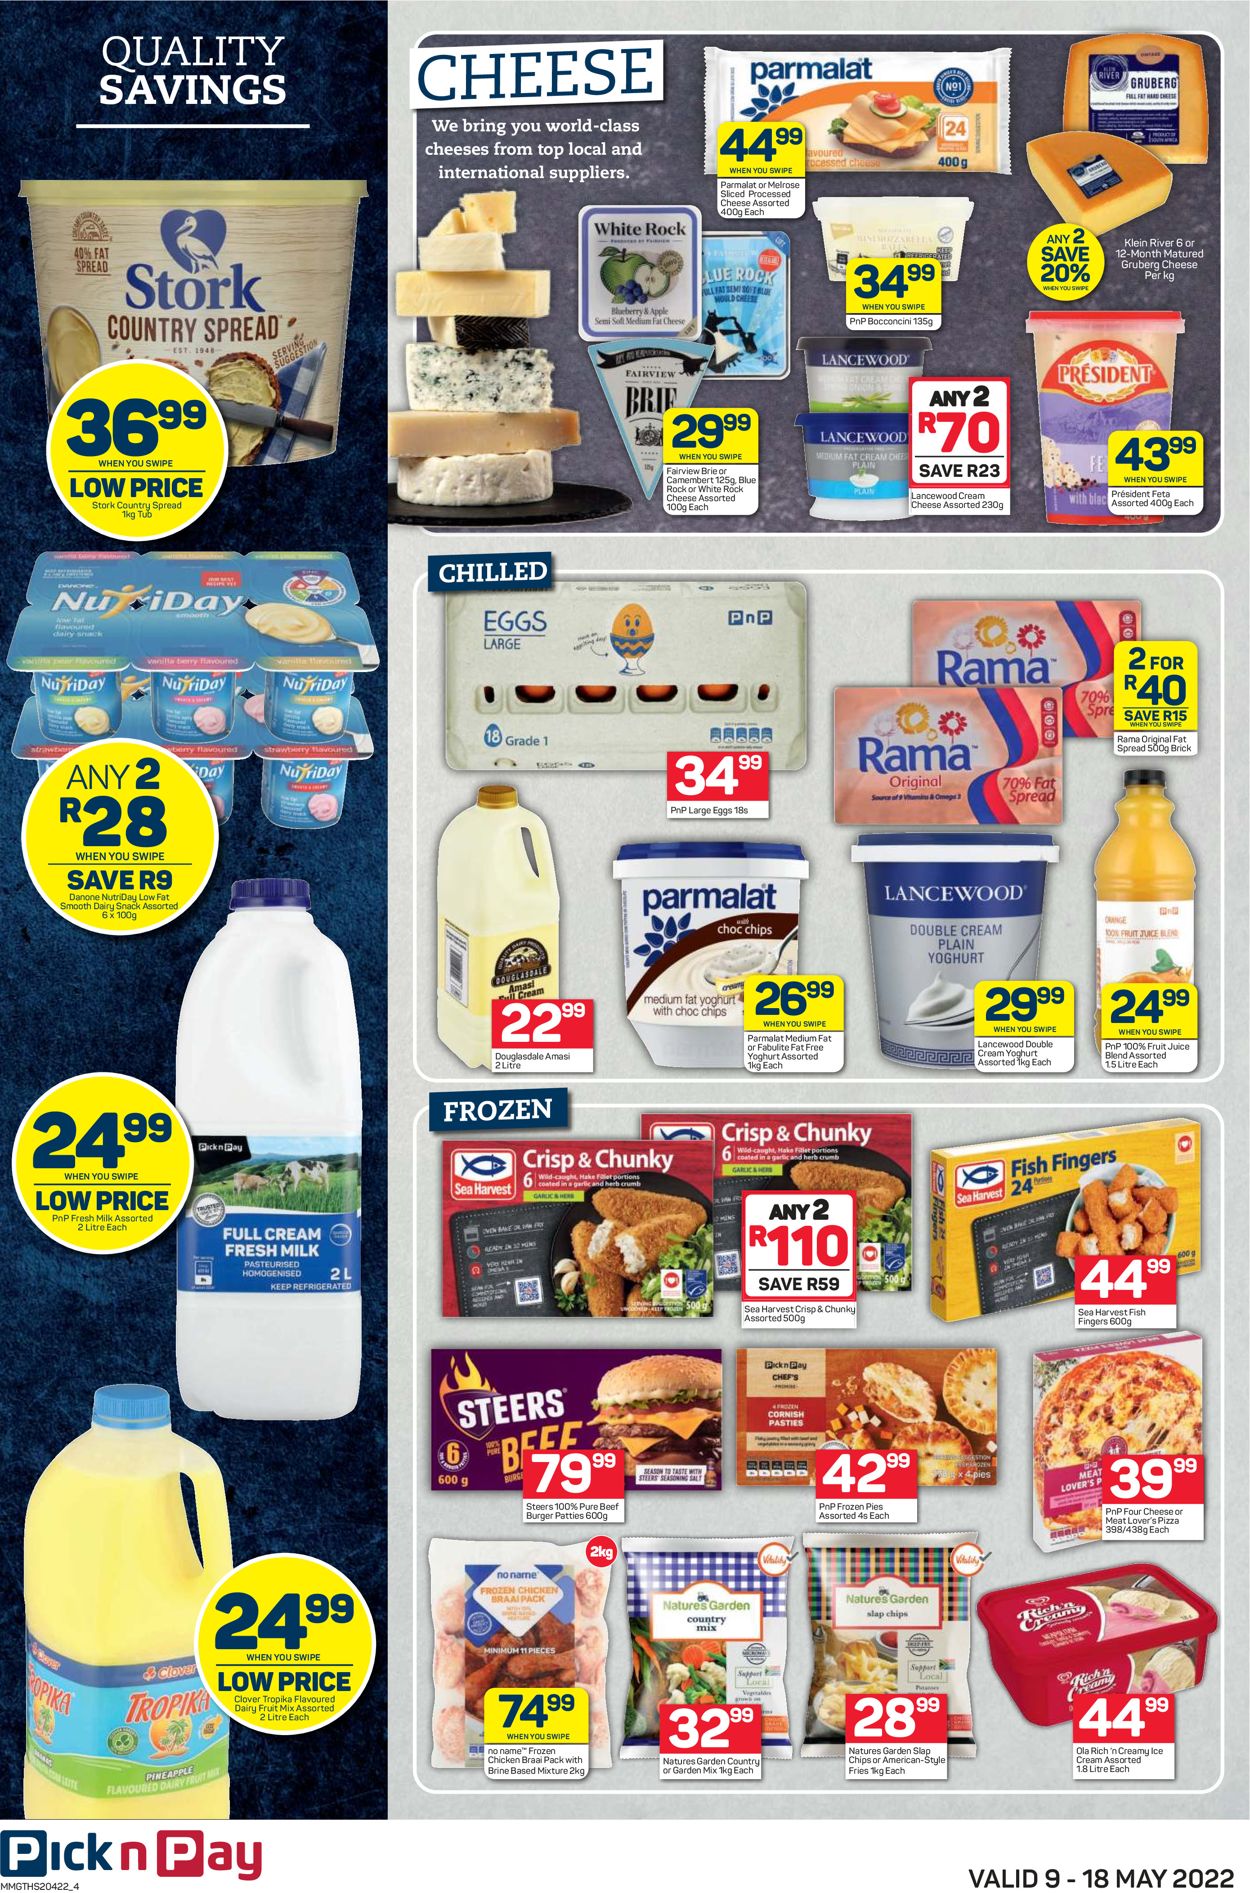 Pick n Pay Catalogue - 2022/05/09-2022/05/18 (Page 4)